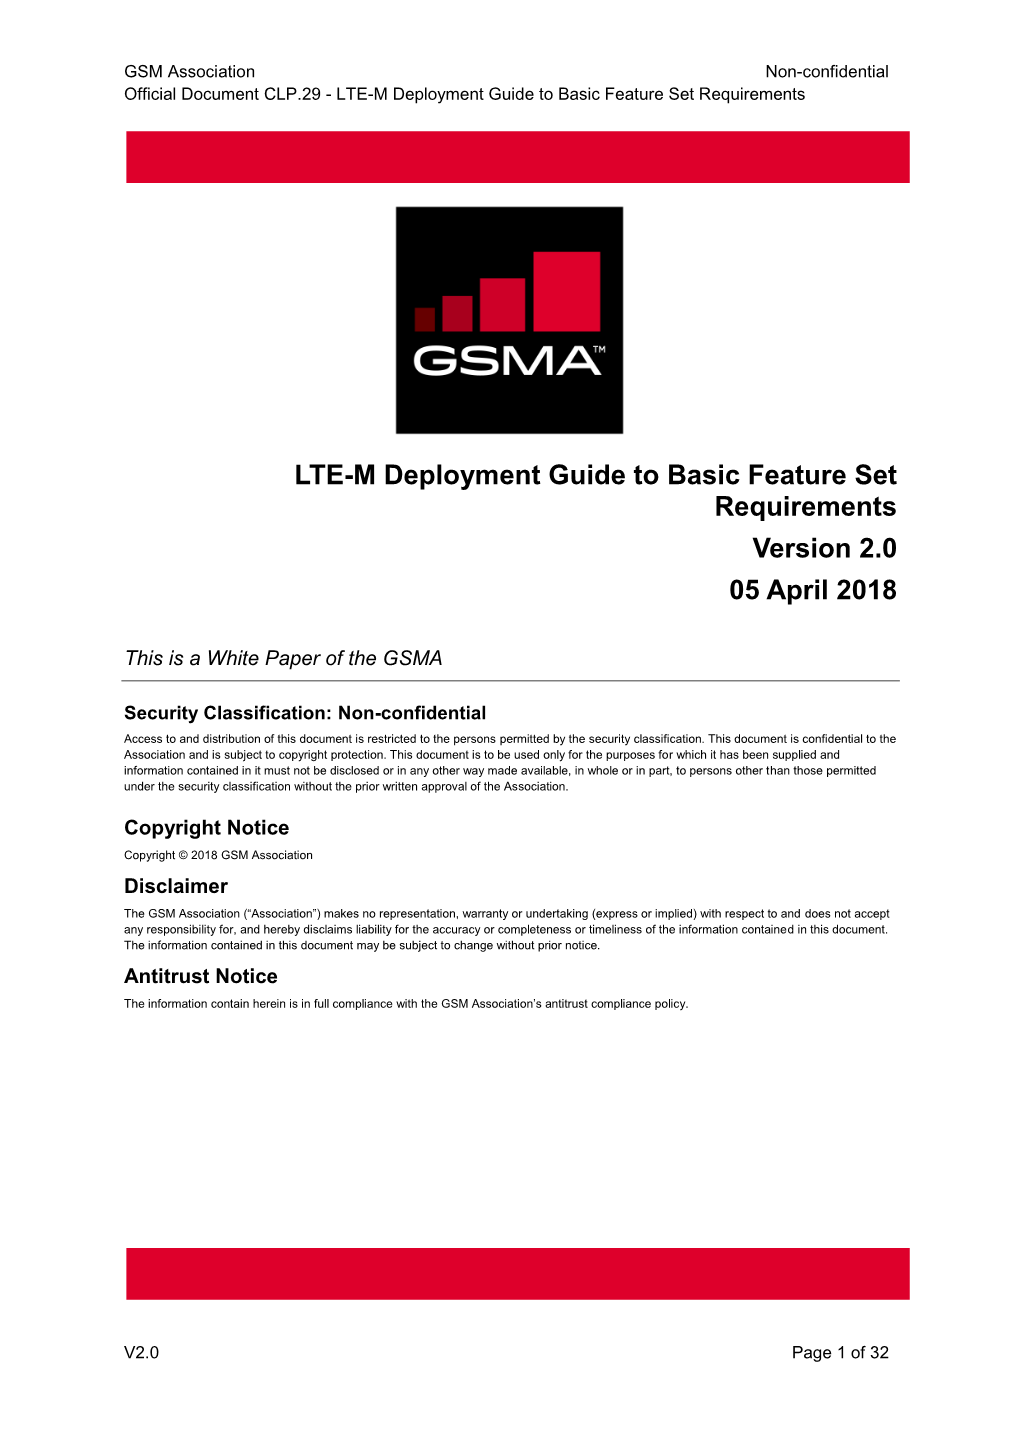 LTE-M Deployment Guide to Basic Feature Set Requirements Version 2.0 05 April 2018